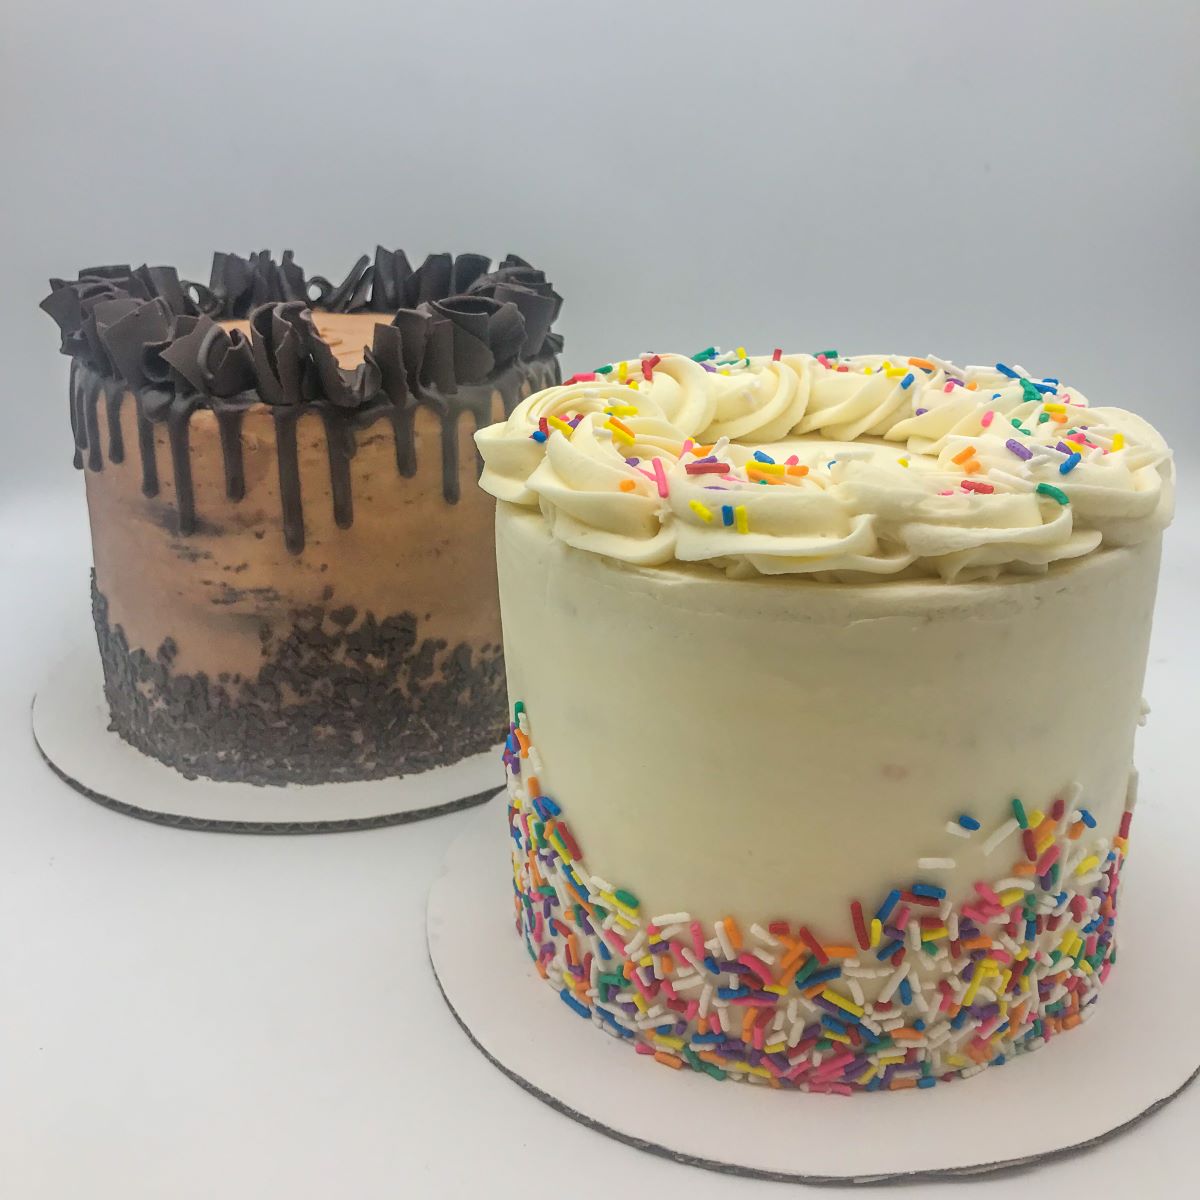 Two minimalist cakes decorated with sprinkles or choccolate curls.